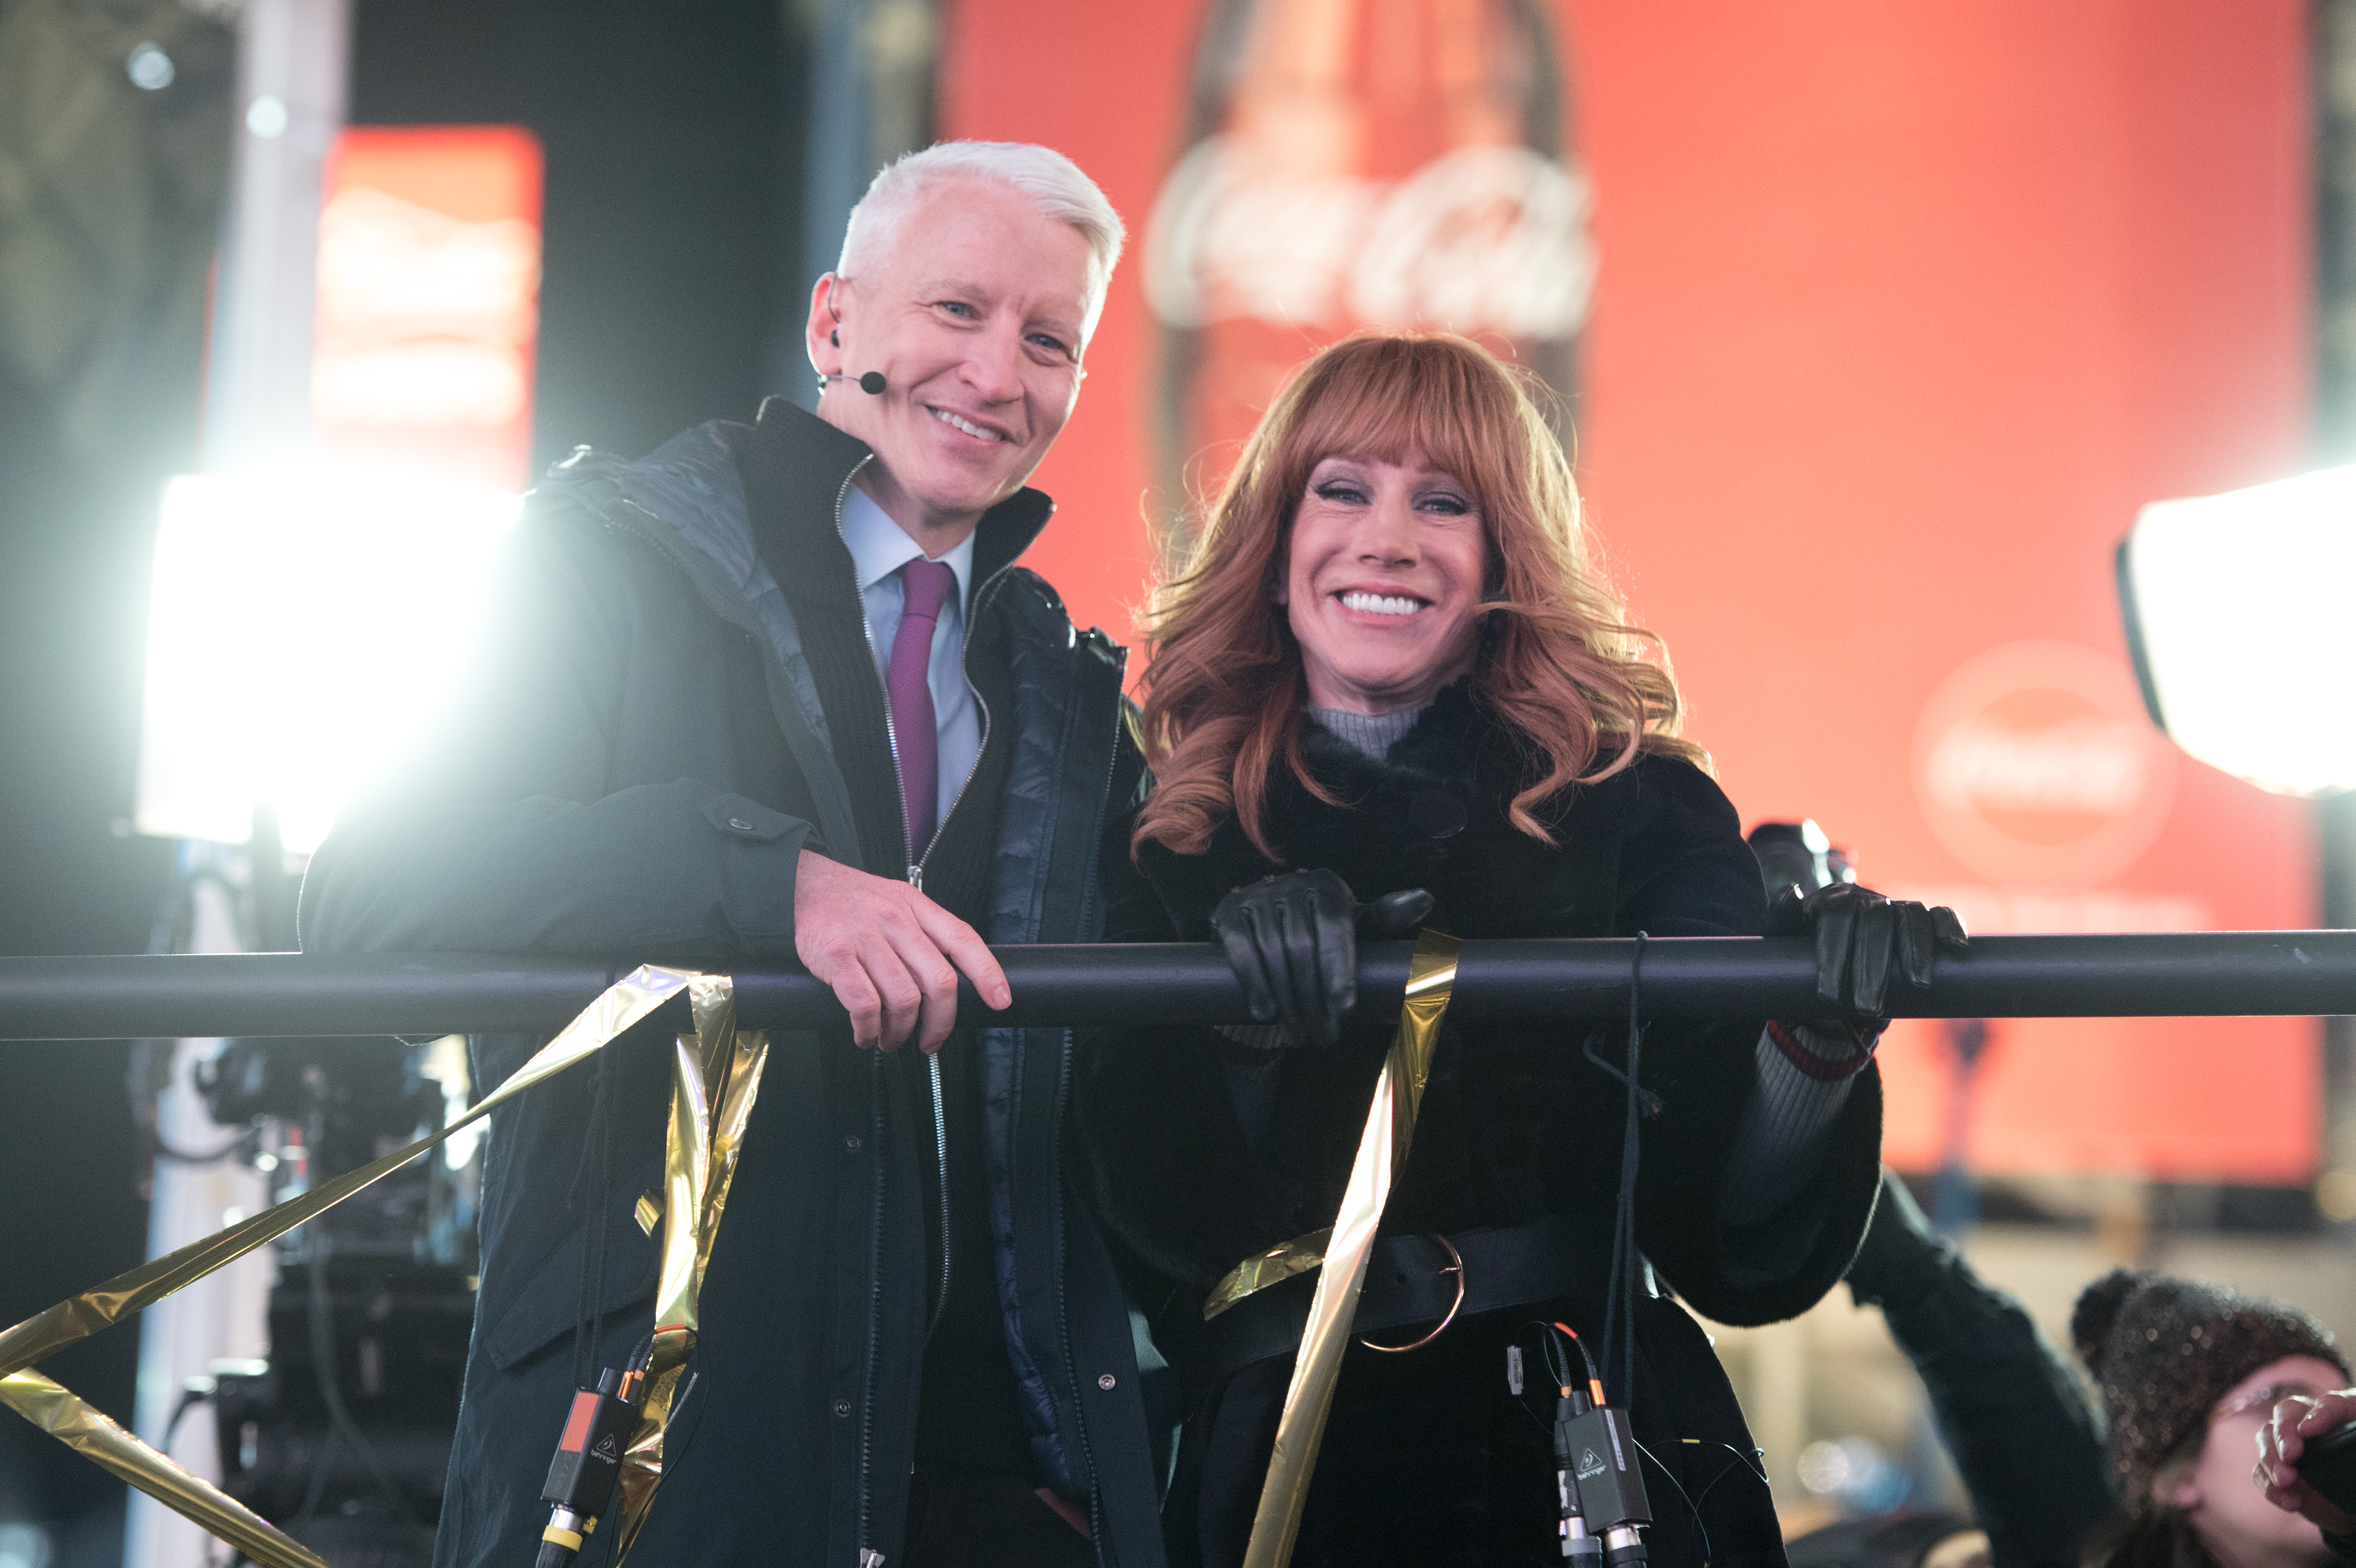 New Year's Eve Anderson Cooper and Kathy Griffin